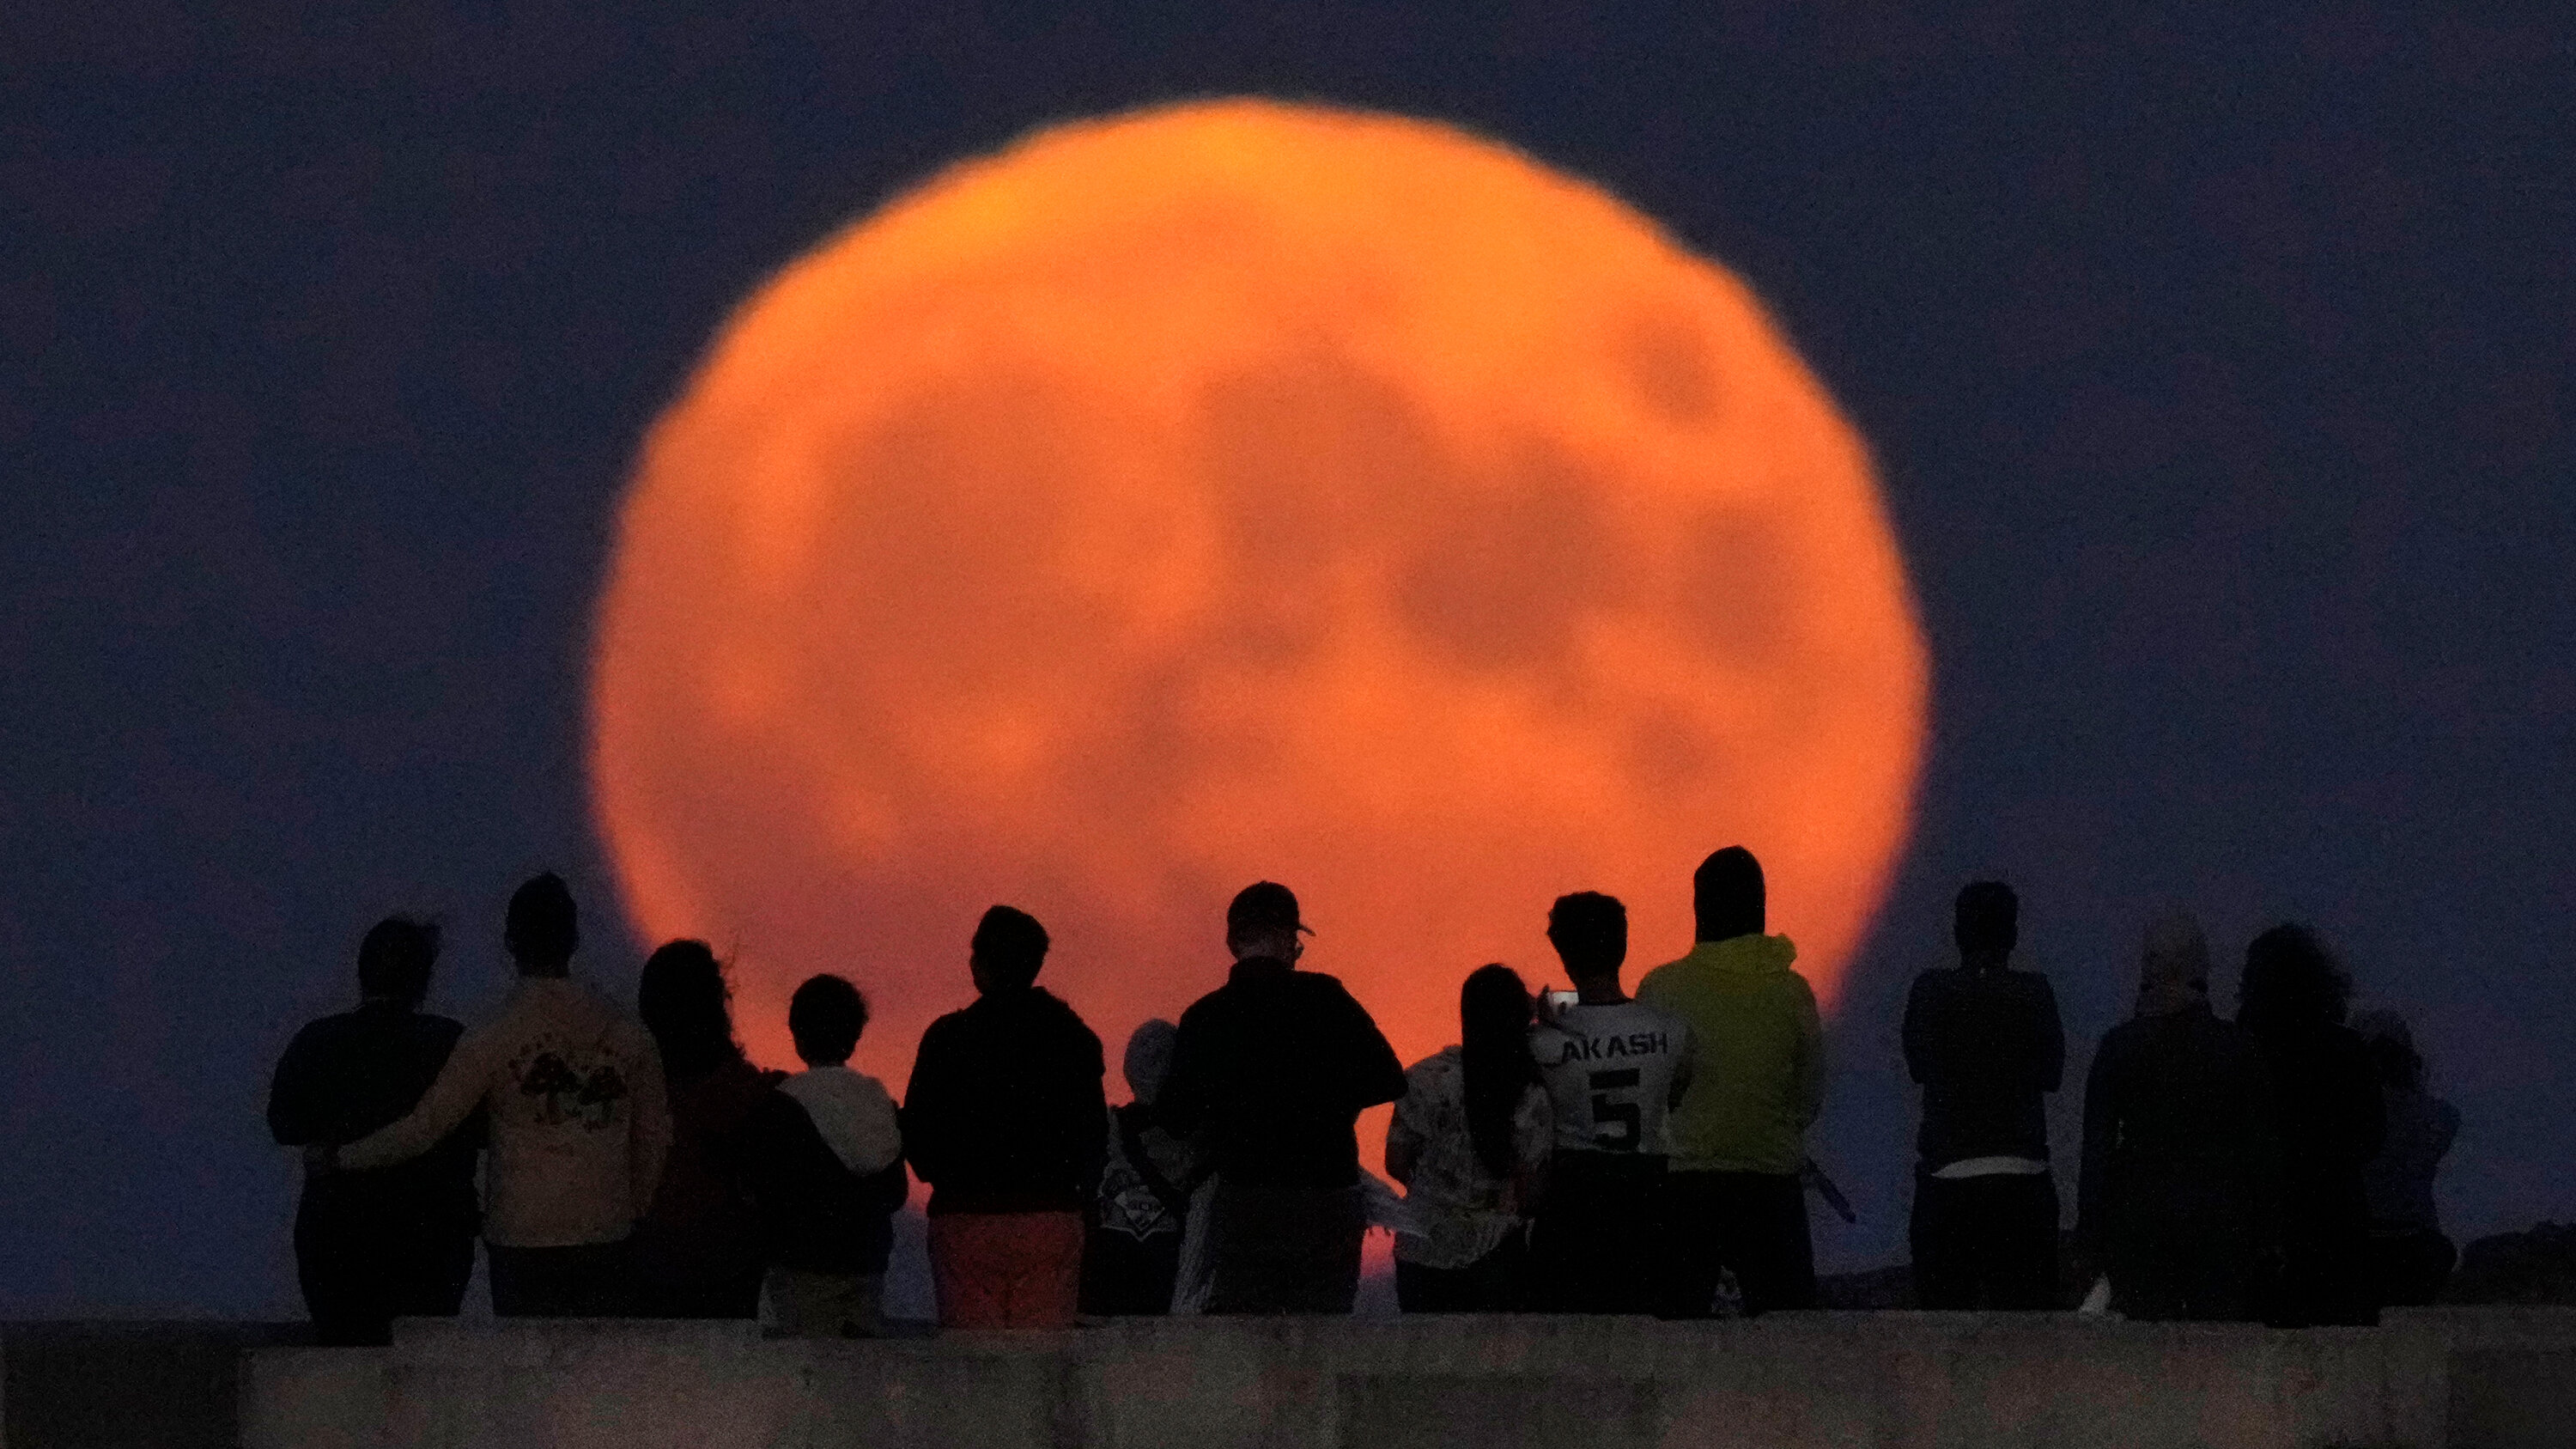 A Group Of People Looking at an Orange Moon